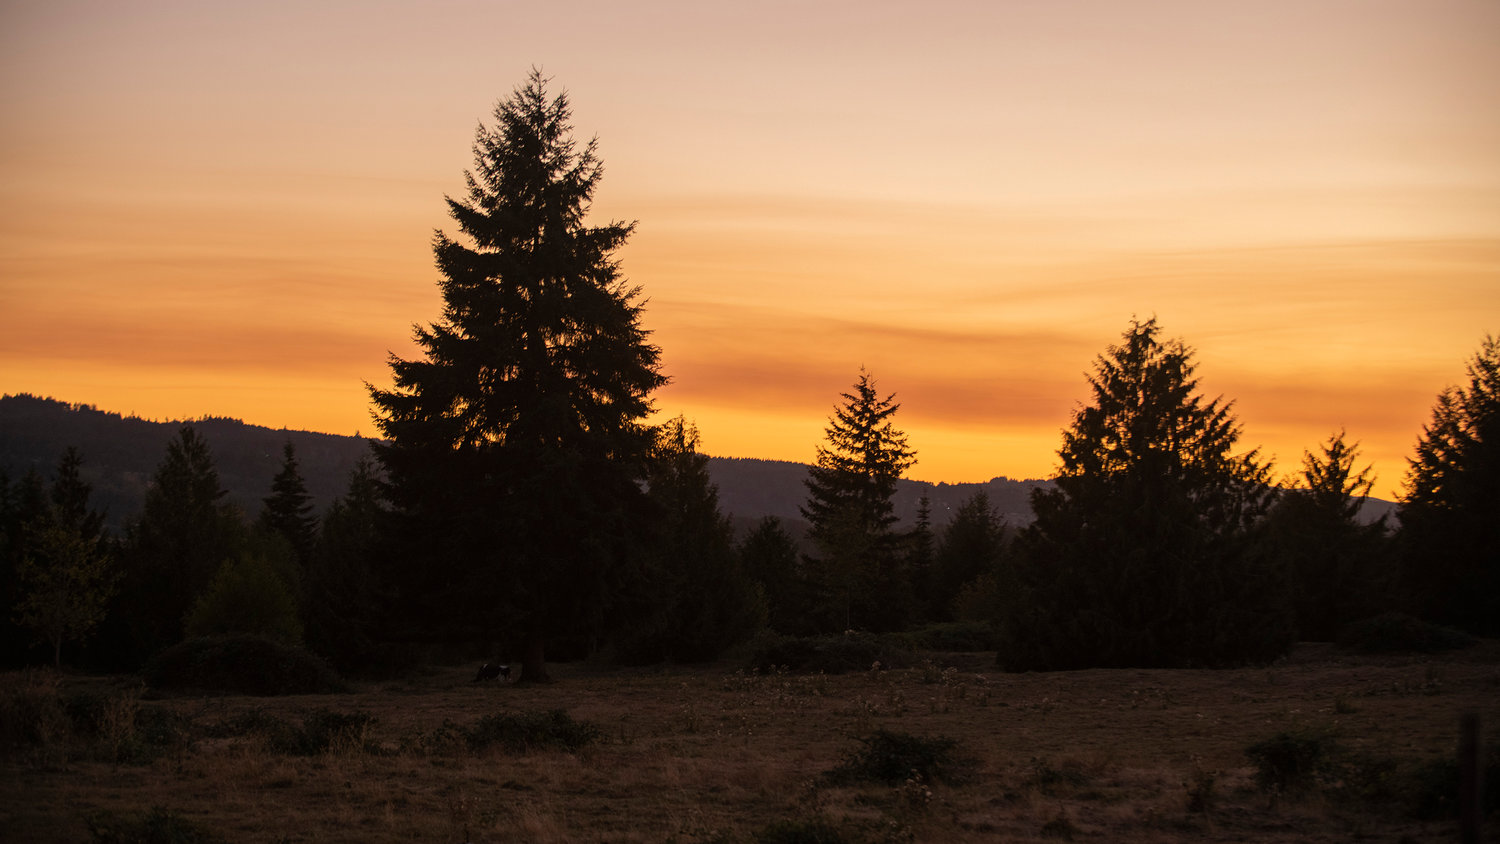 FILE PHOTO — The sun sets over the Willapa Hills seen from Highway 603 near Tune Road.